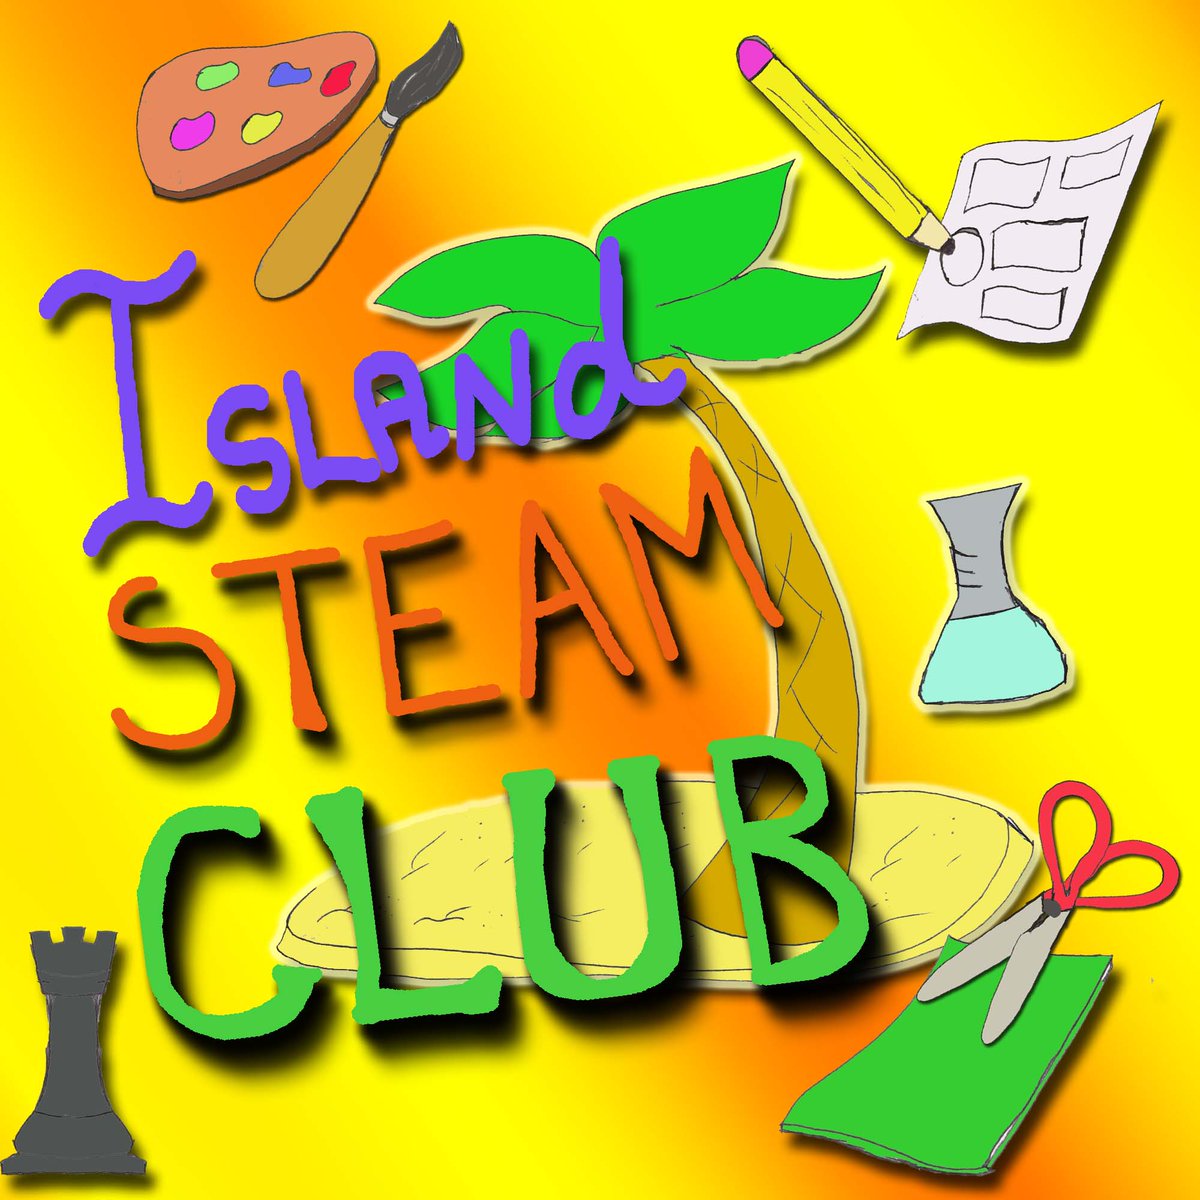 The Island Steam Club starts on Tuesday, June 4!  Join us for a variety of STEAM activities for kids ages 6 - 12 on Tuesdays at 3:00 PM at Pleasure Island Library. See the library calendar to register!